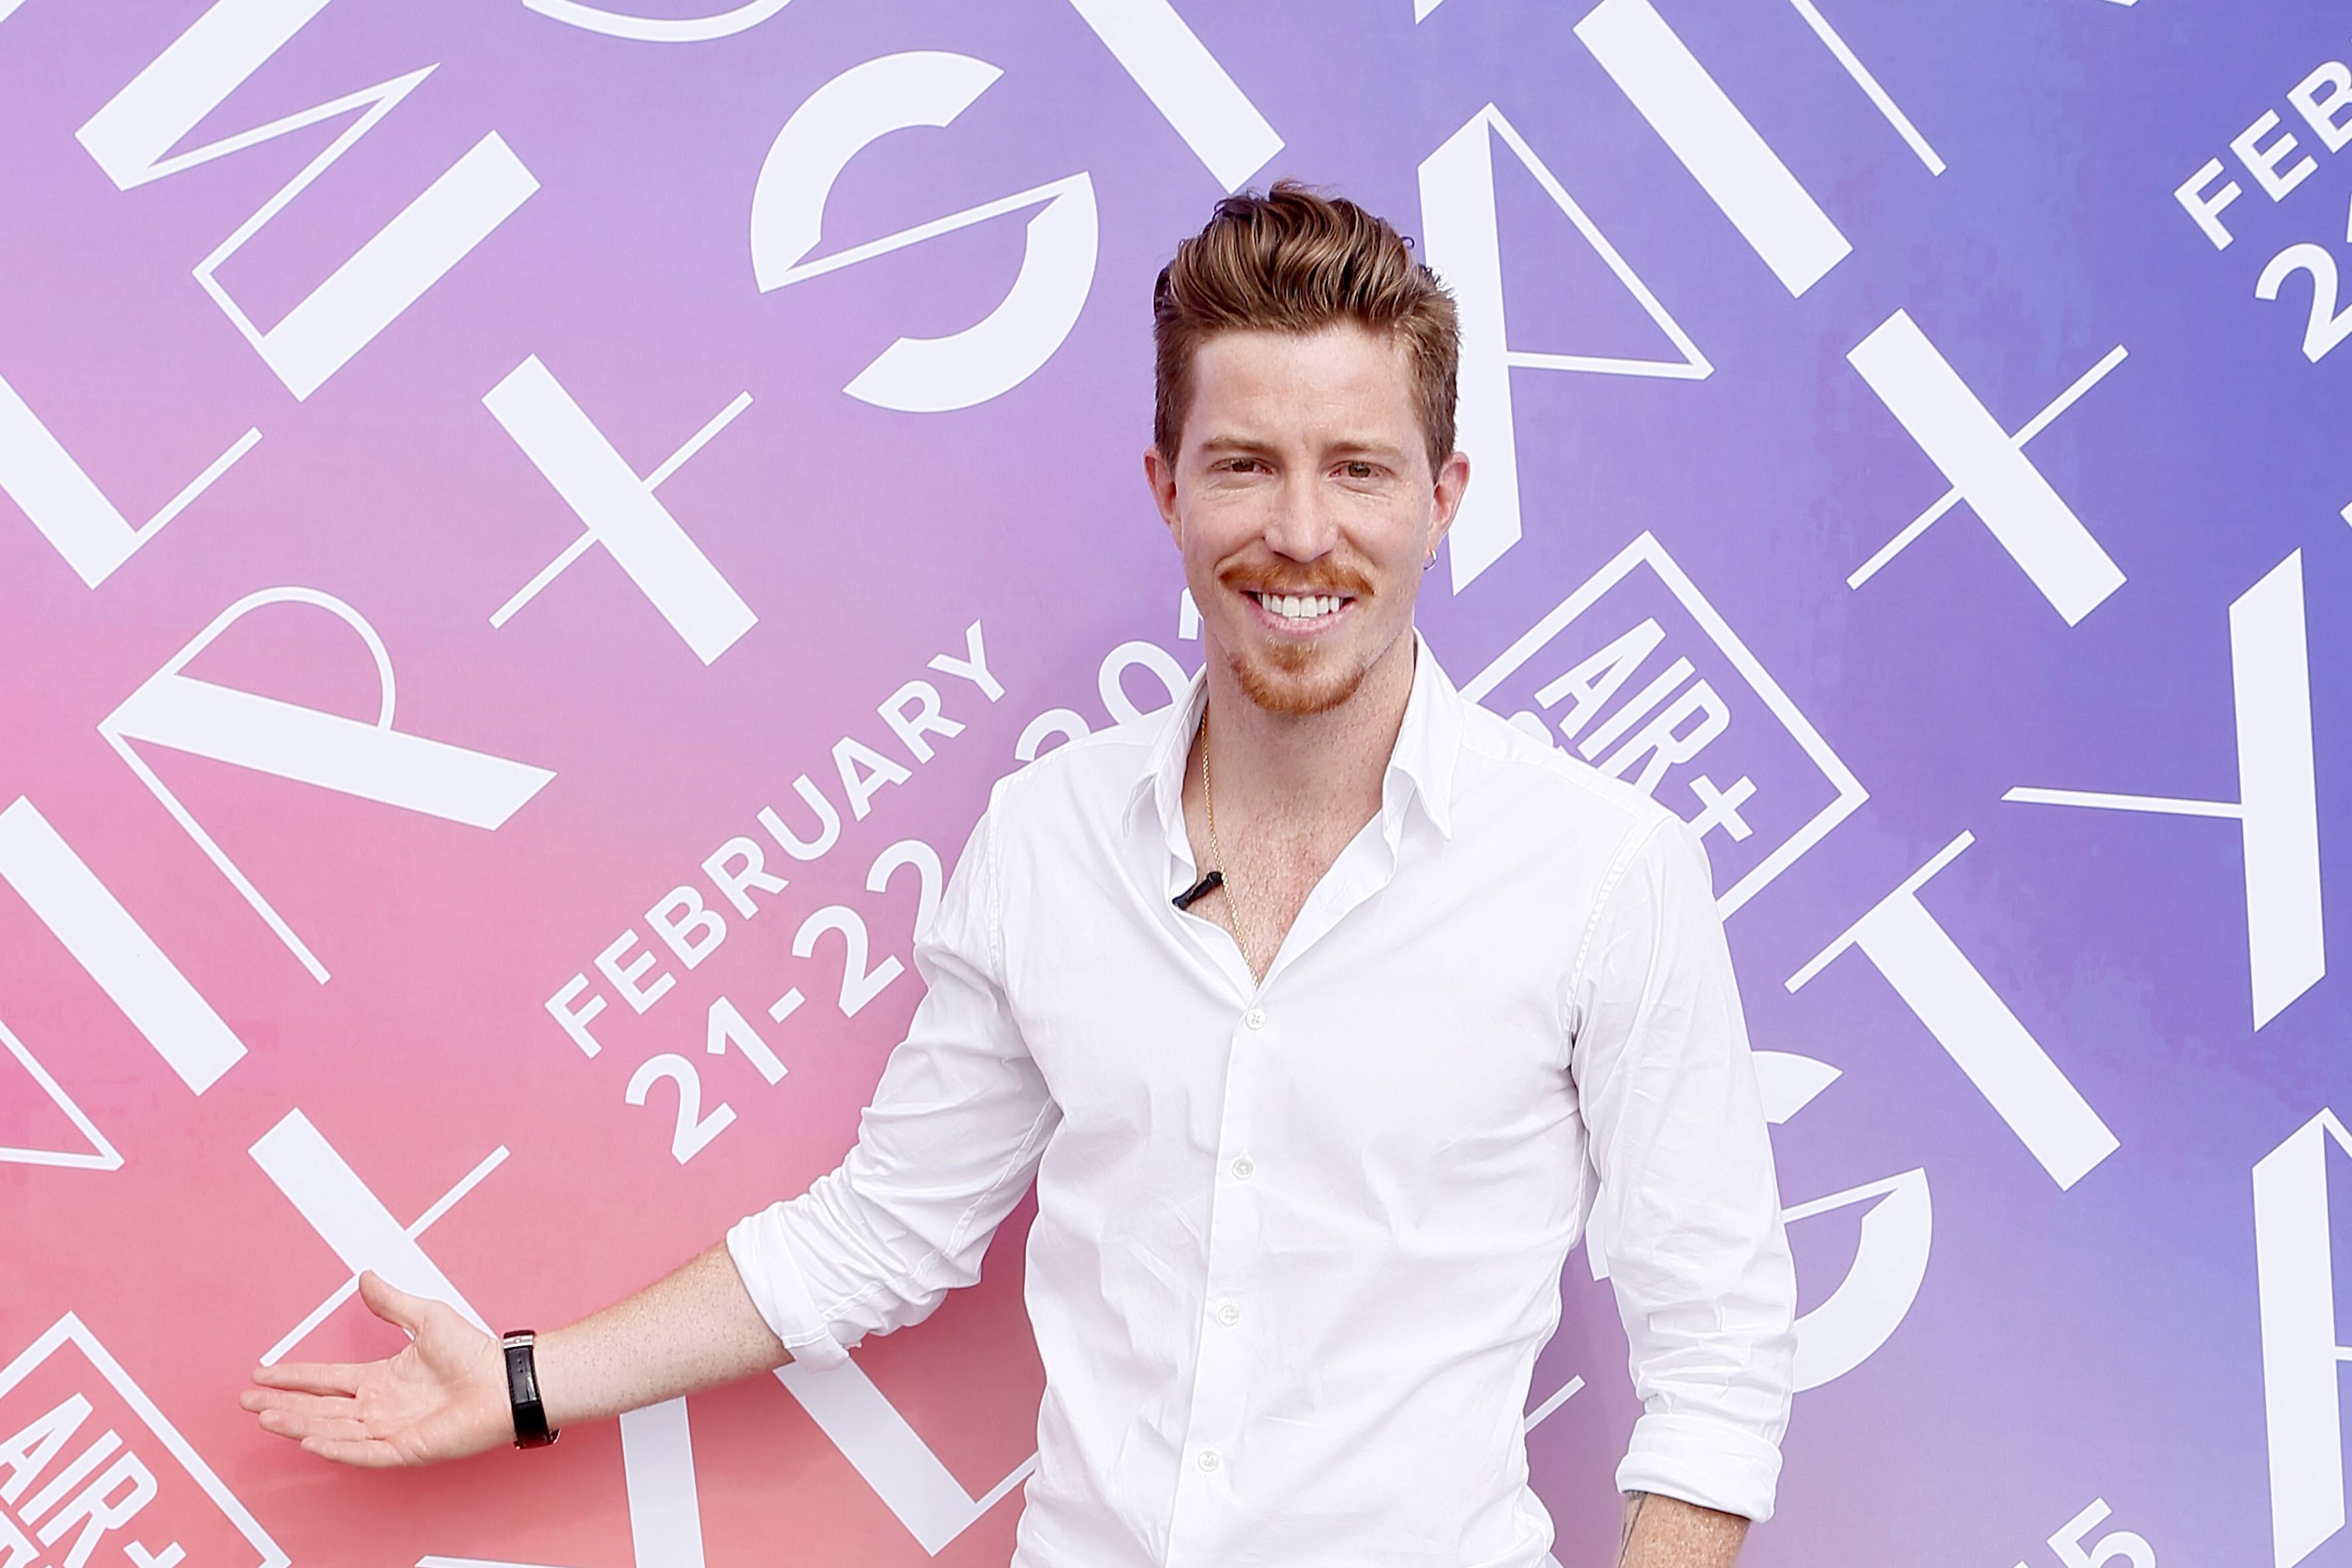 Shaun White, Snowboarder and Skateboarder, on Design — Q&A - The